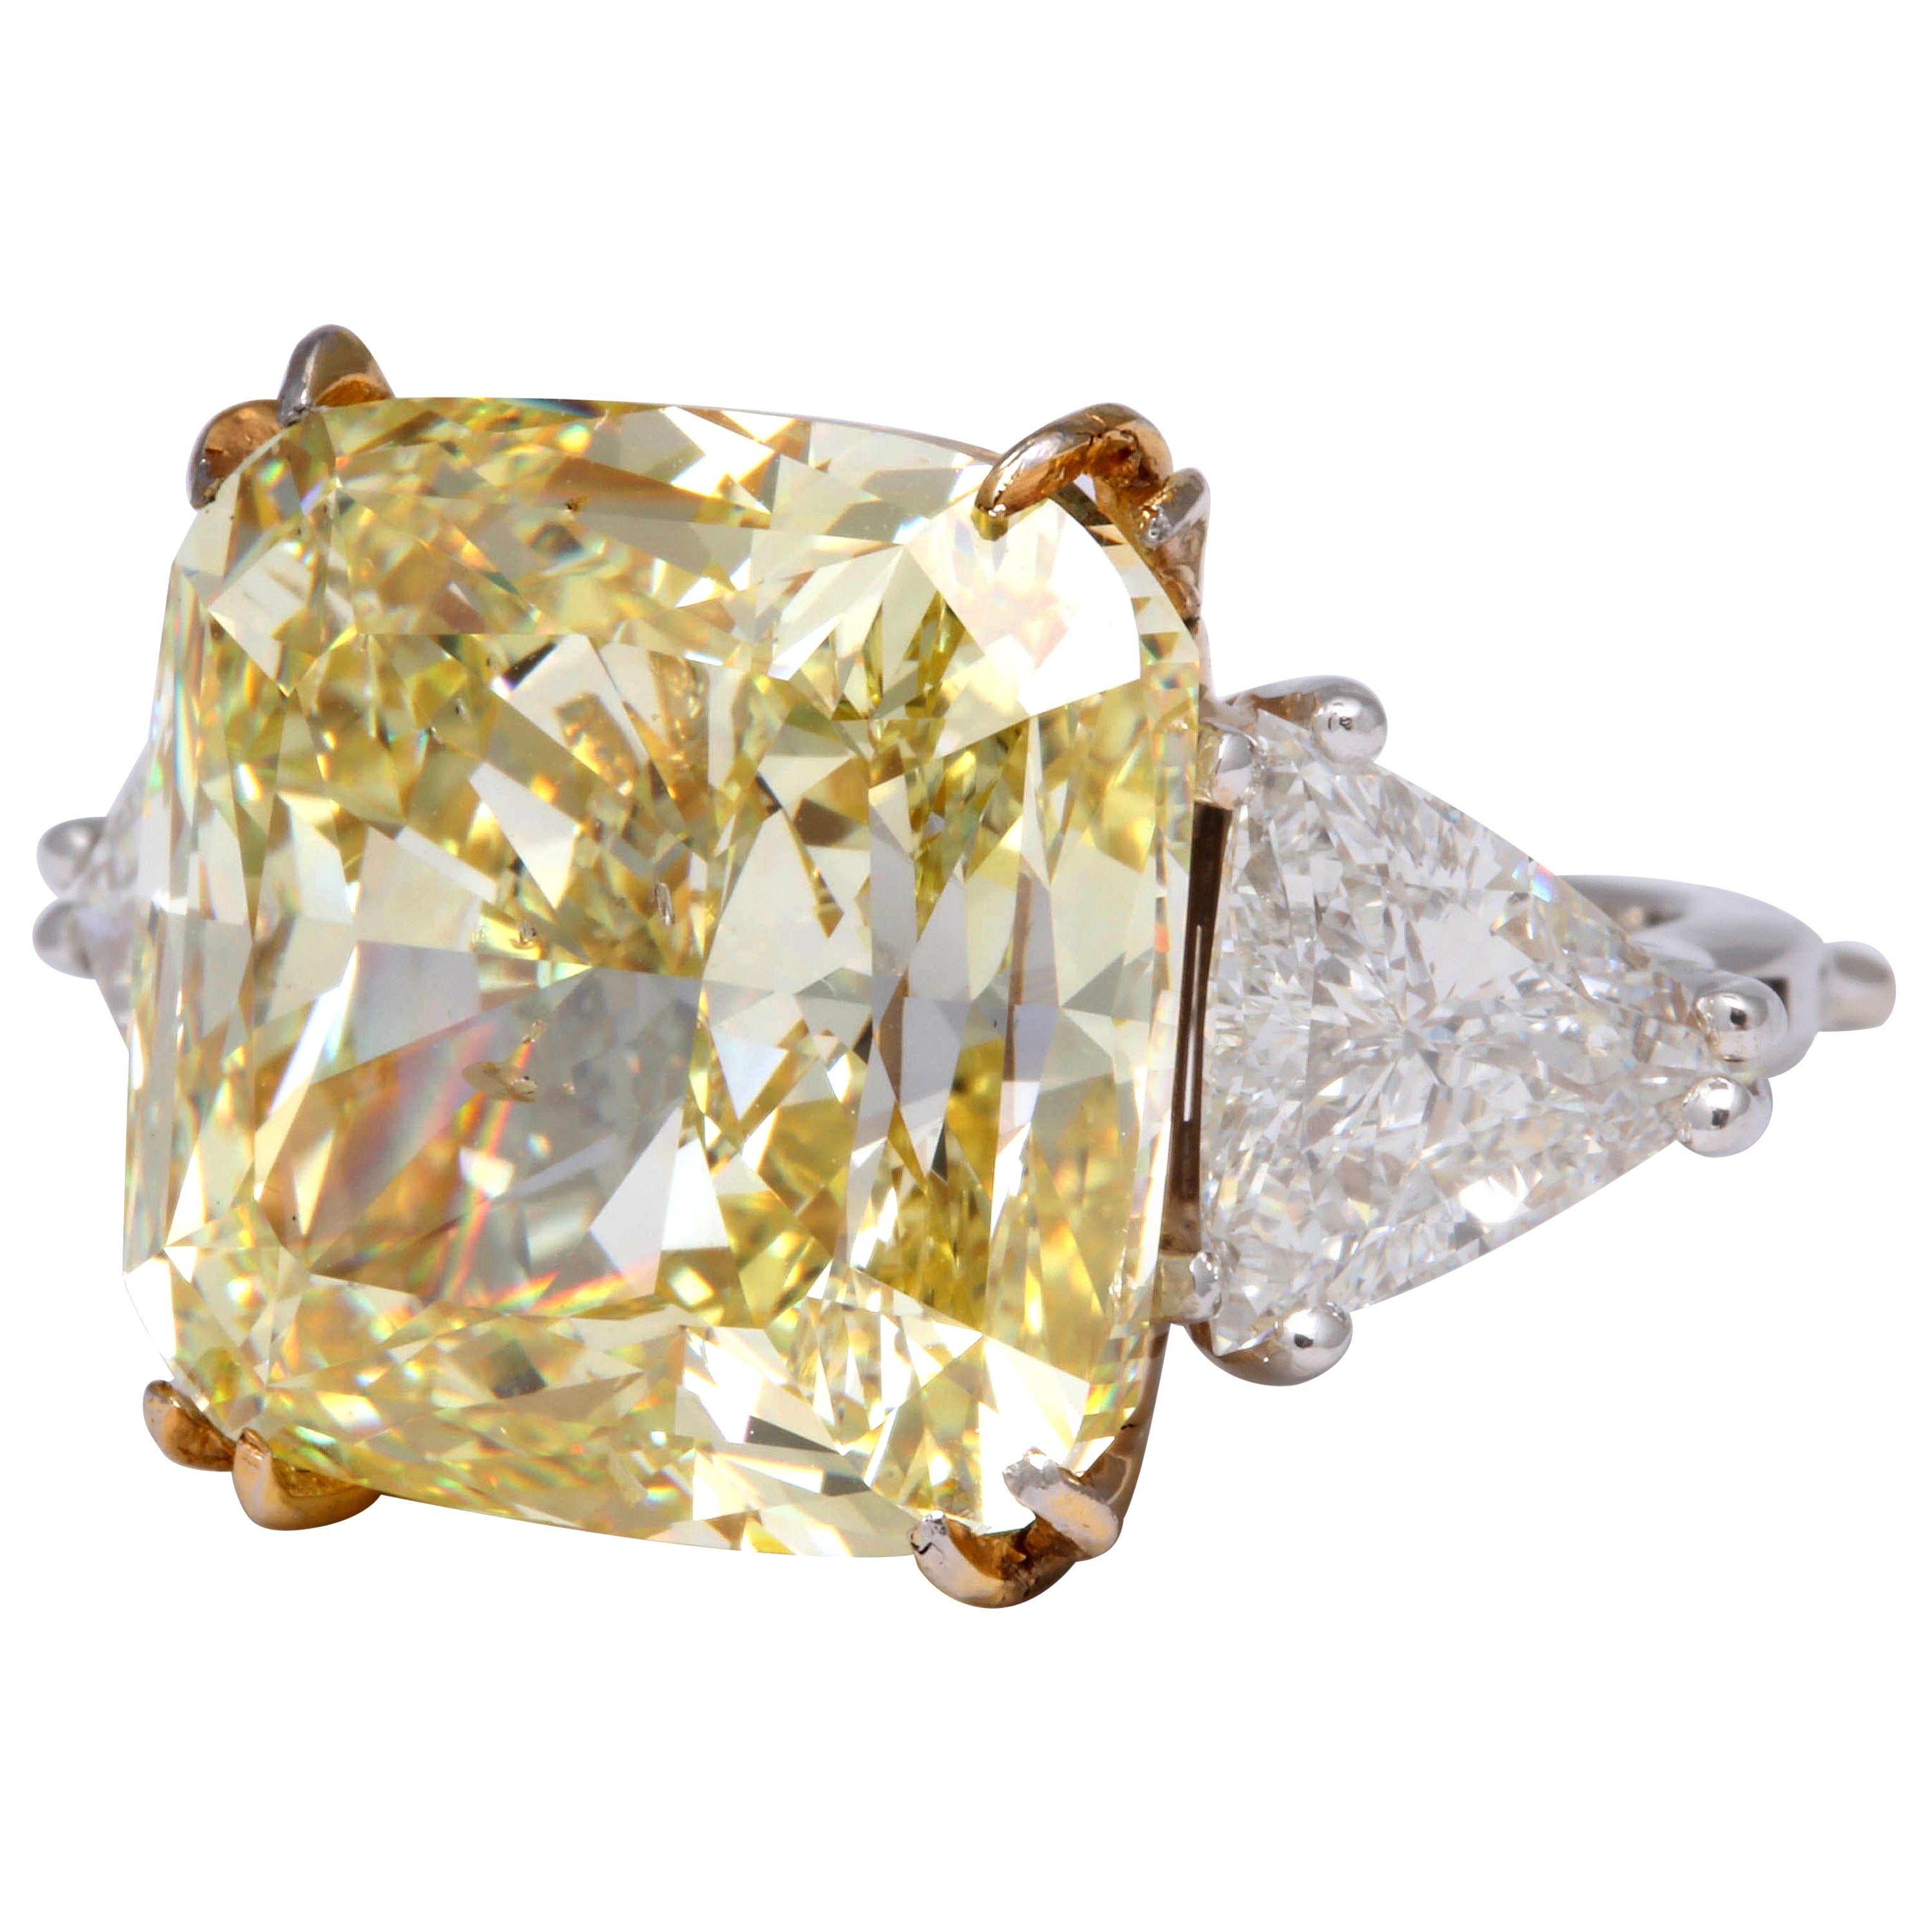 27 Carat Fancy Intense Yellow Diamond Ring GIA Certified For Sale at ...